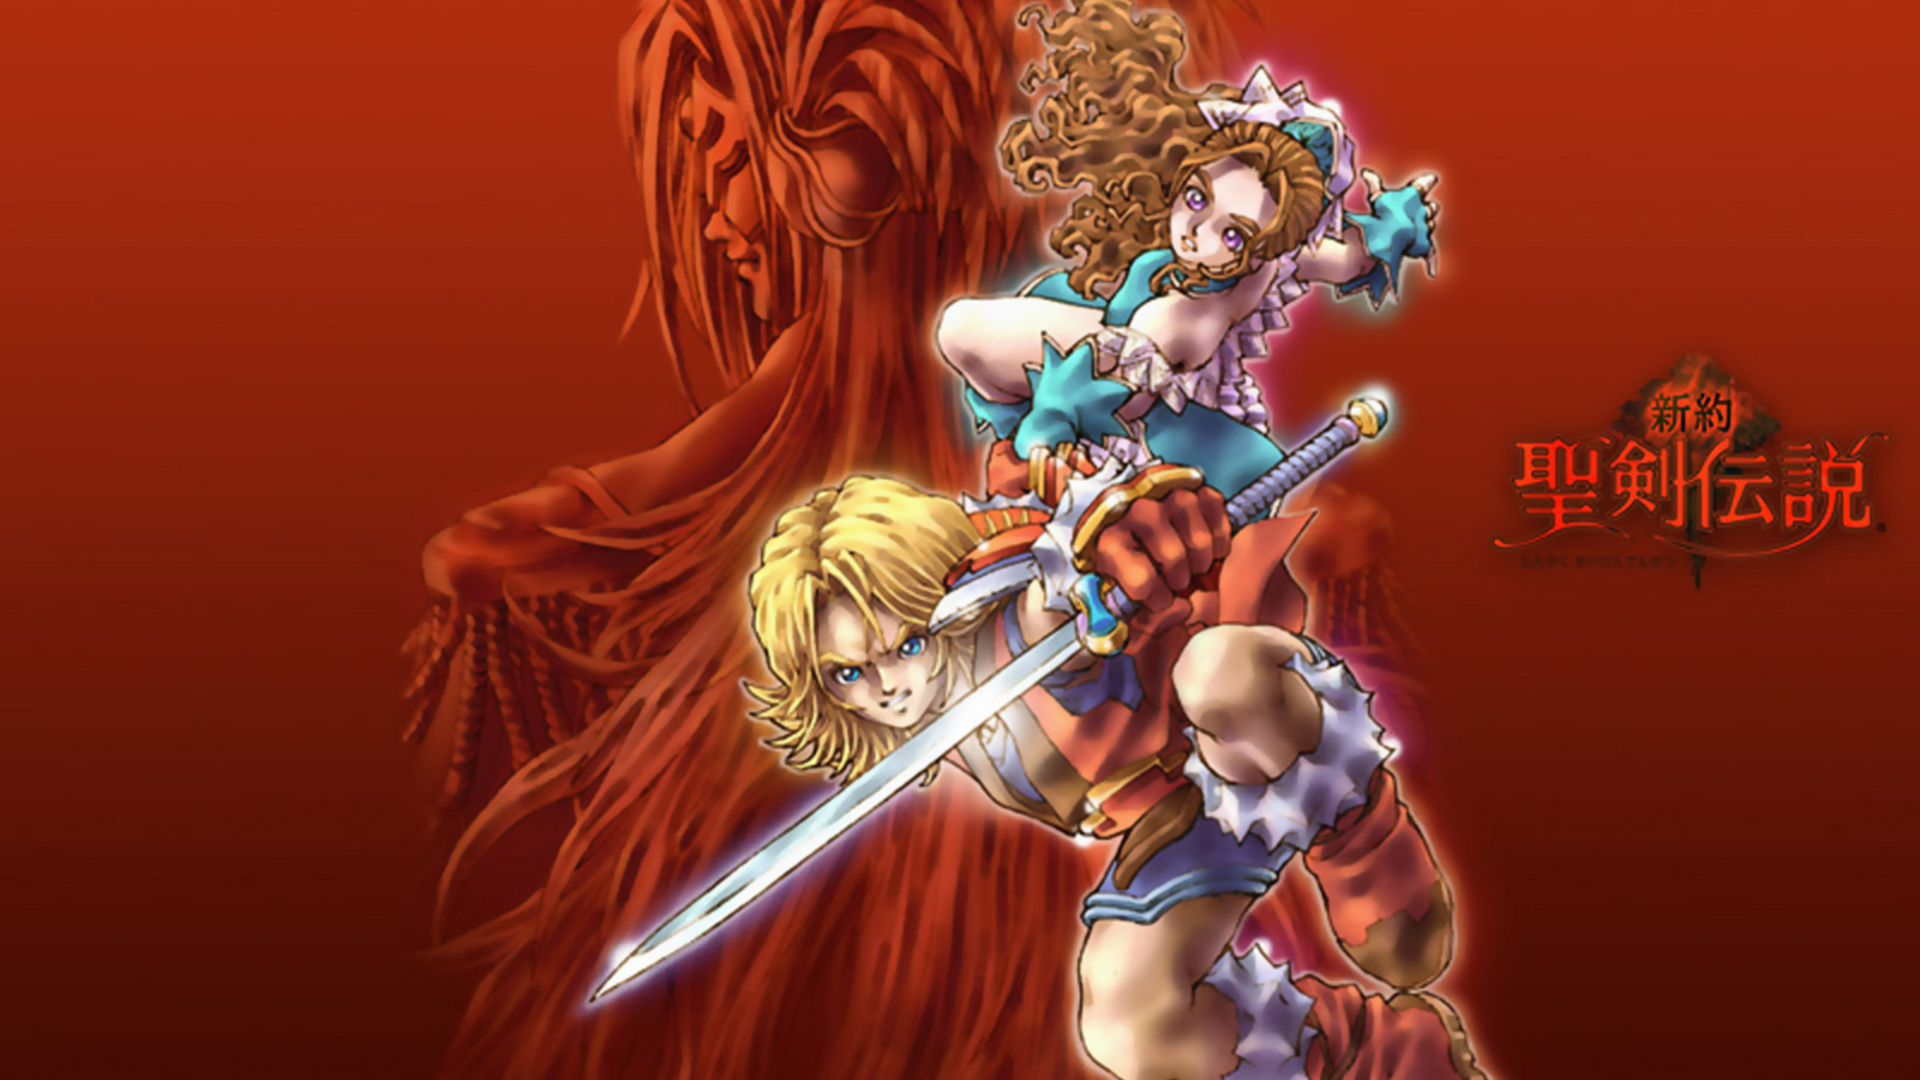 Video Game Sword of Mana HD Wallpaper | Background Image